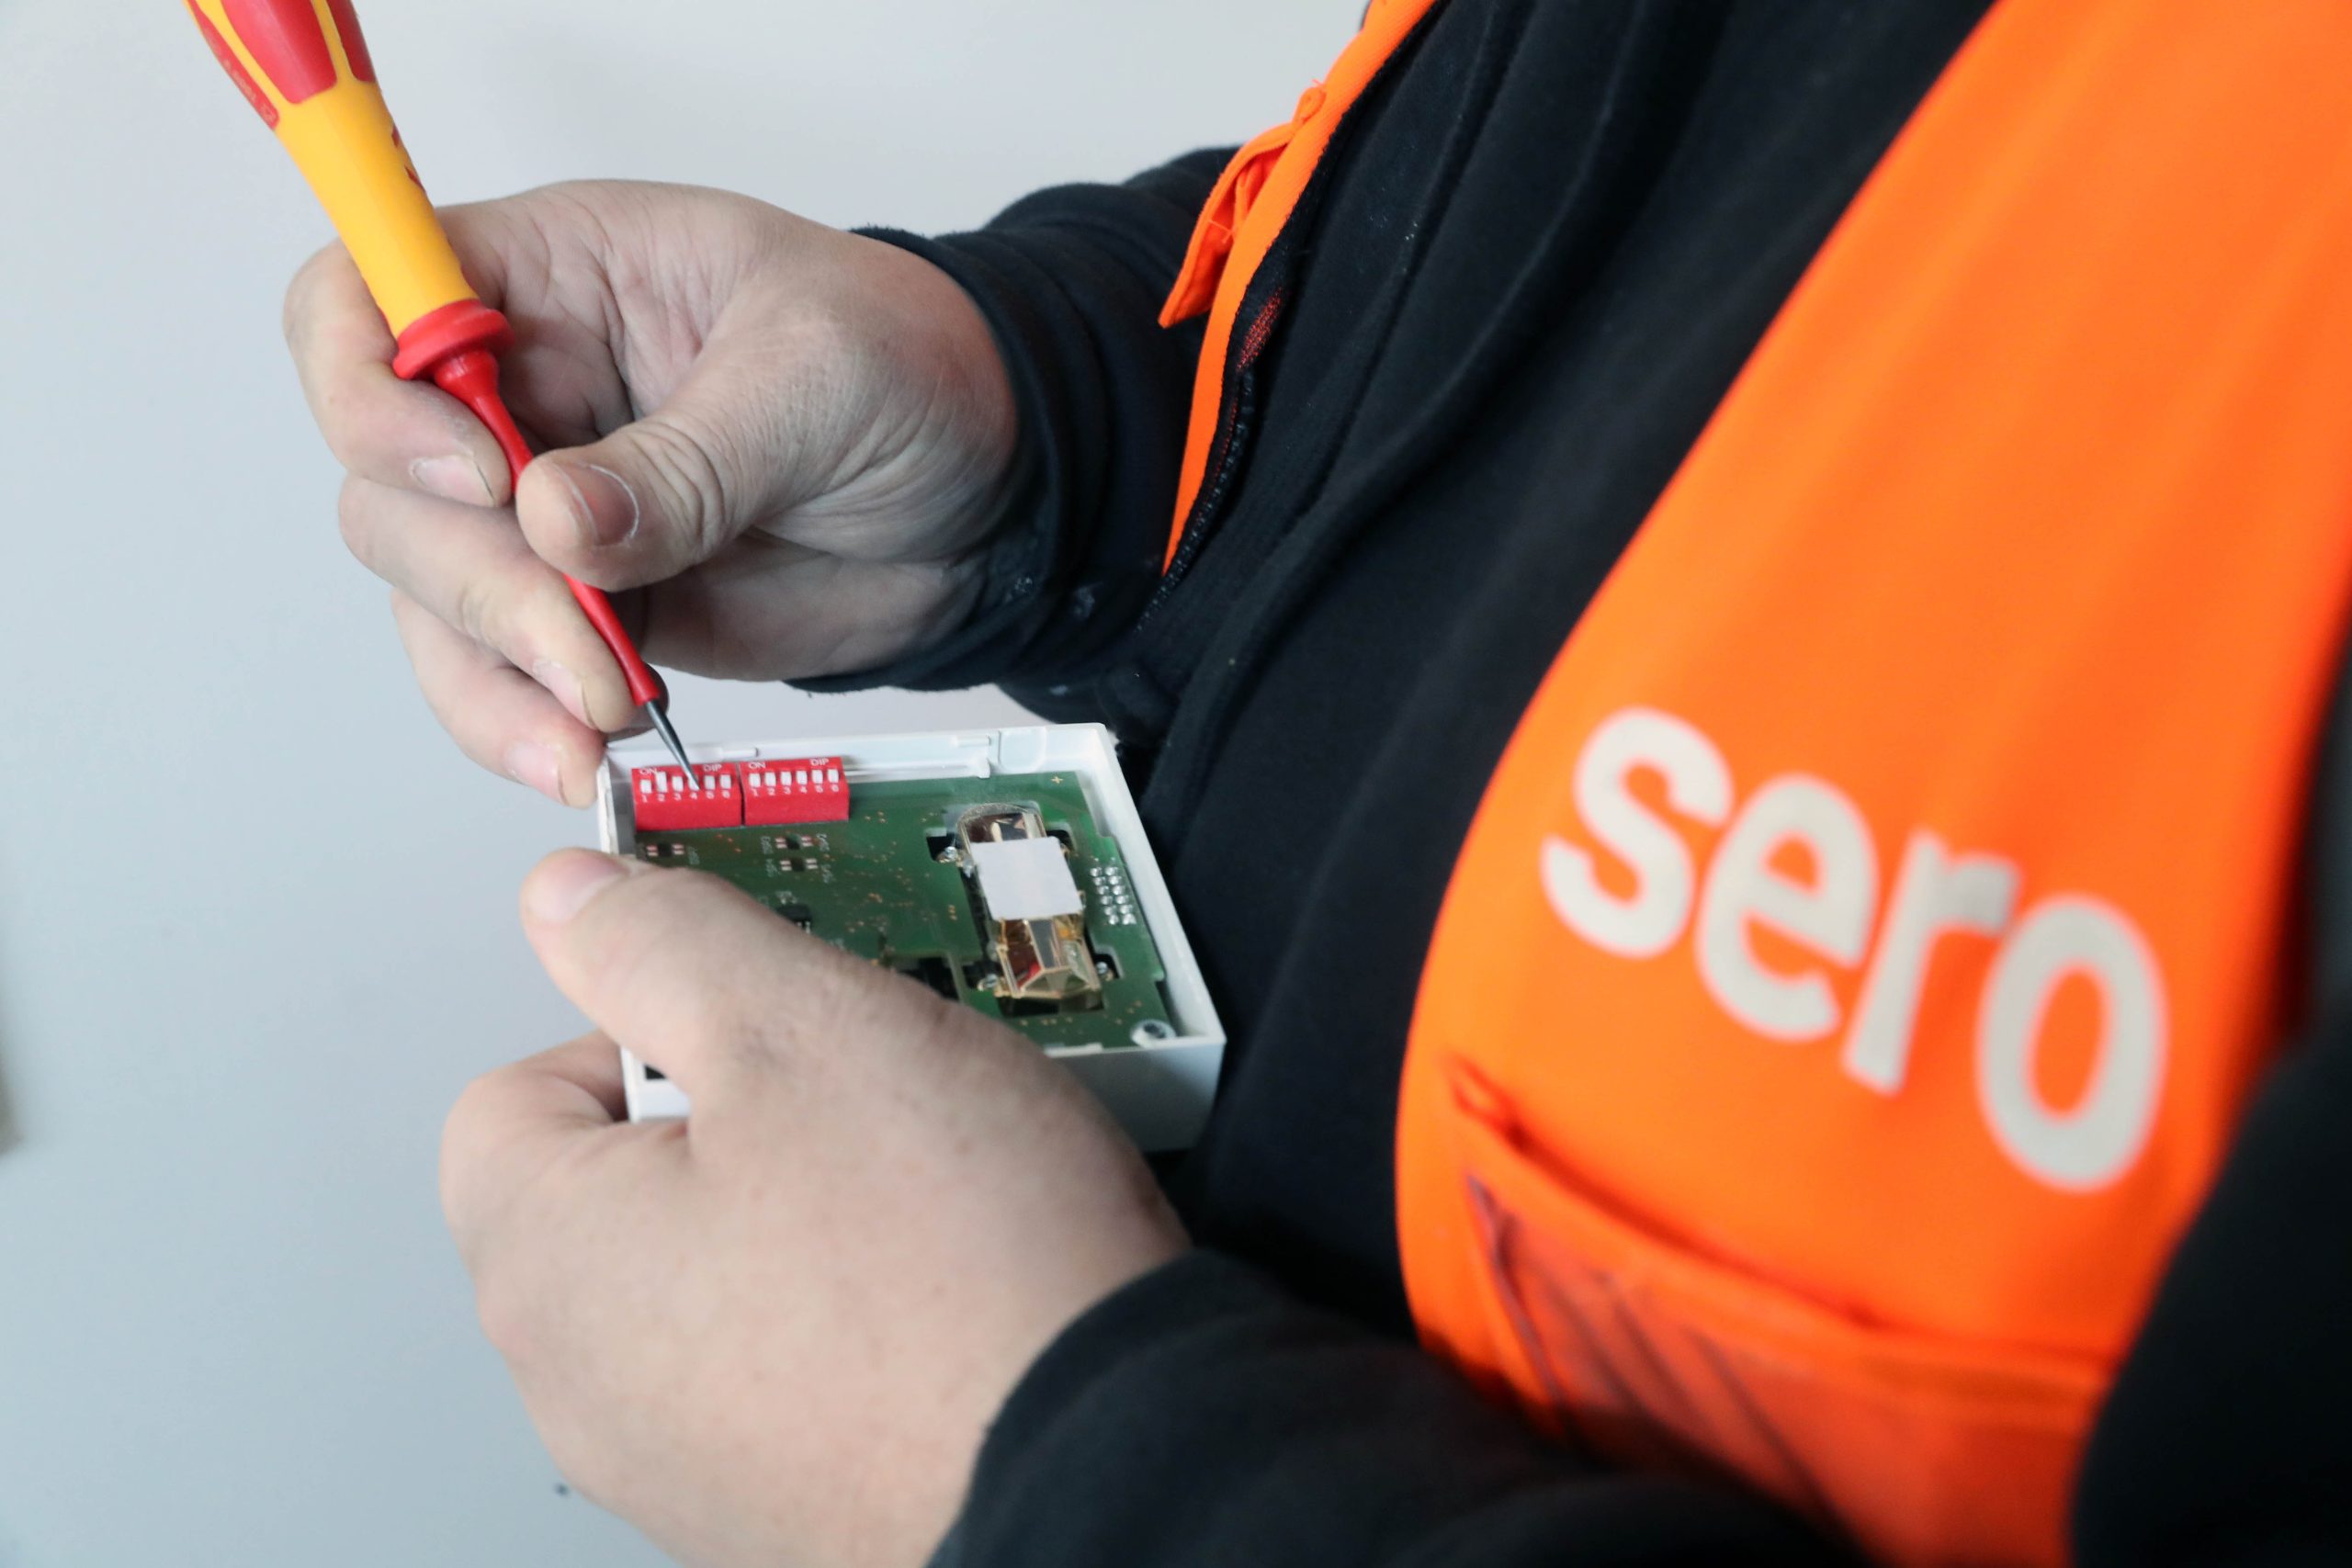 A person wearing an orange vest with Sero logo, fixing a device